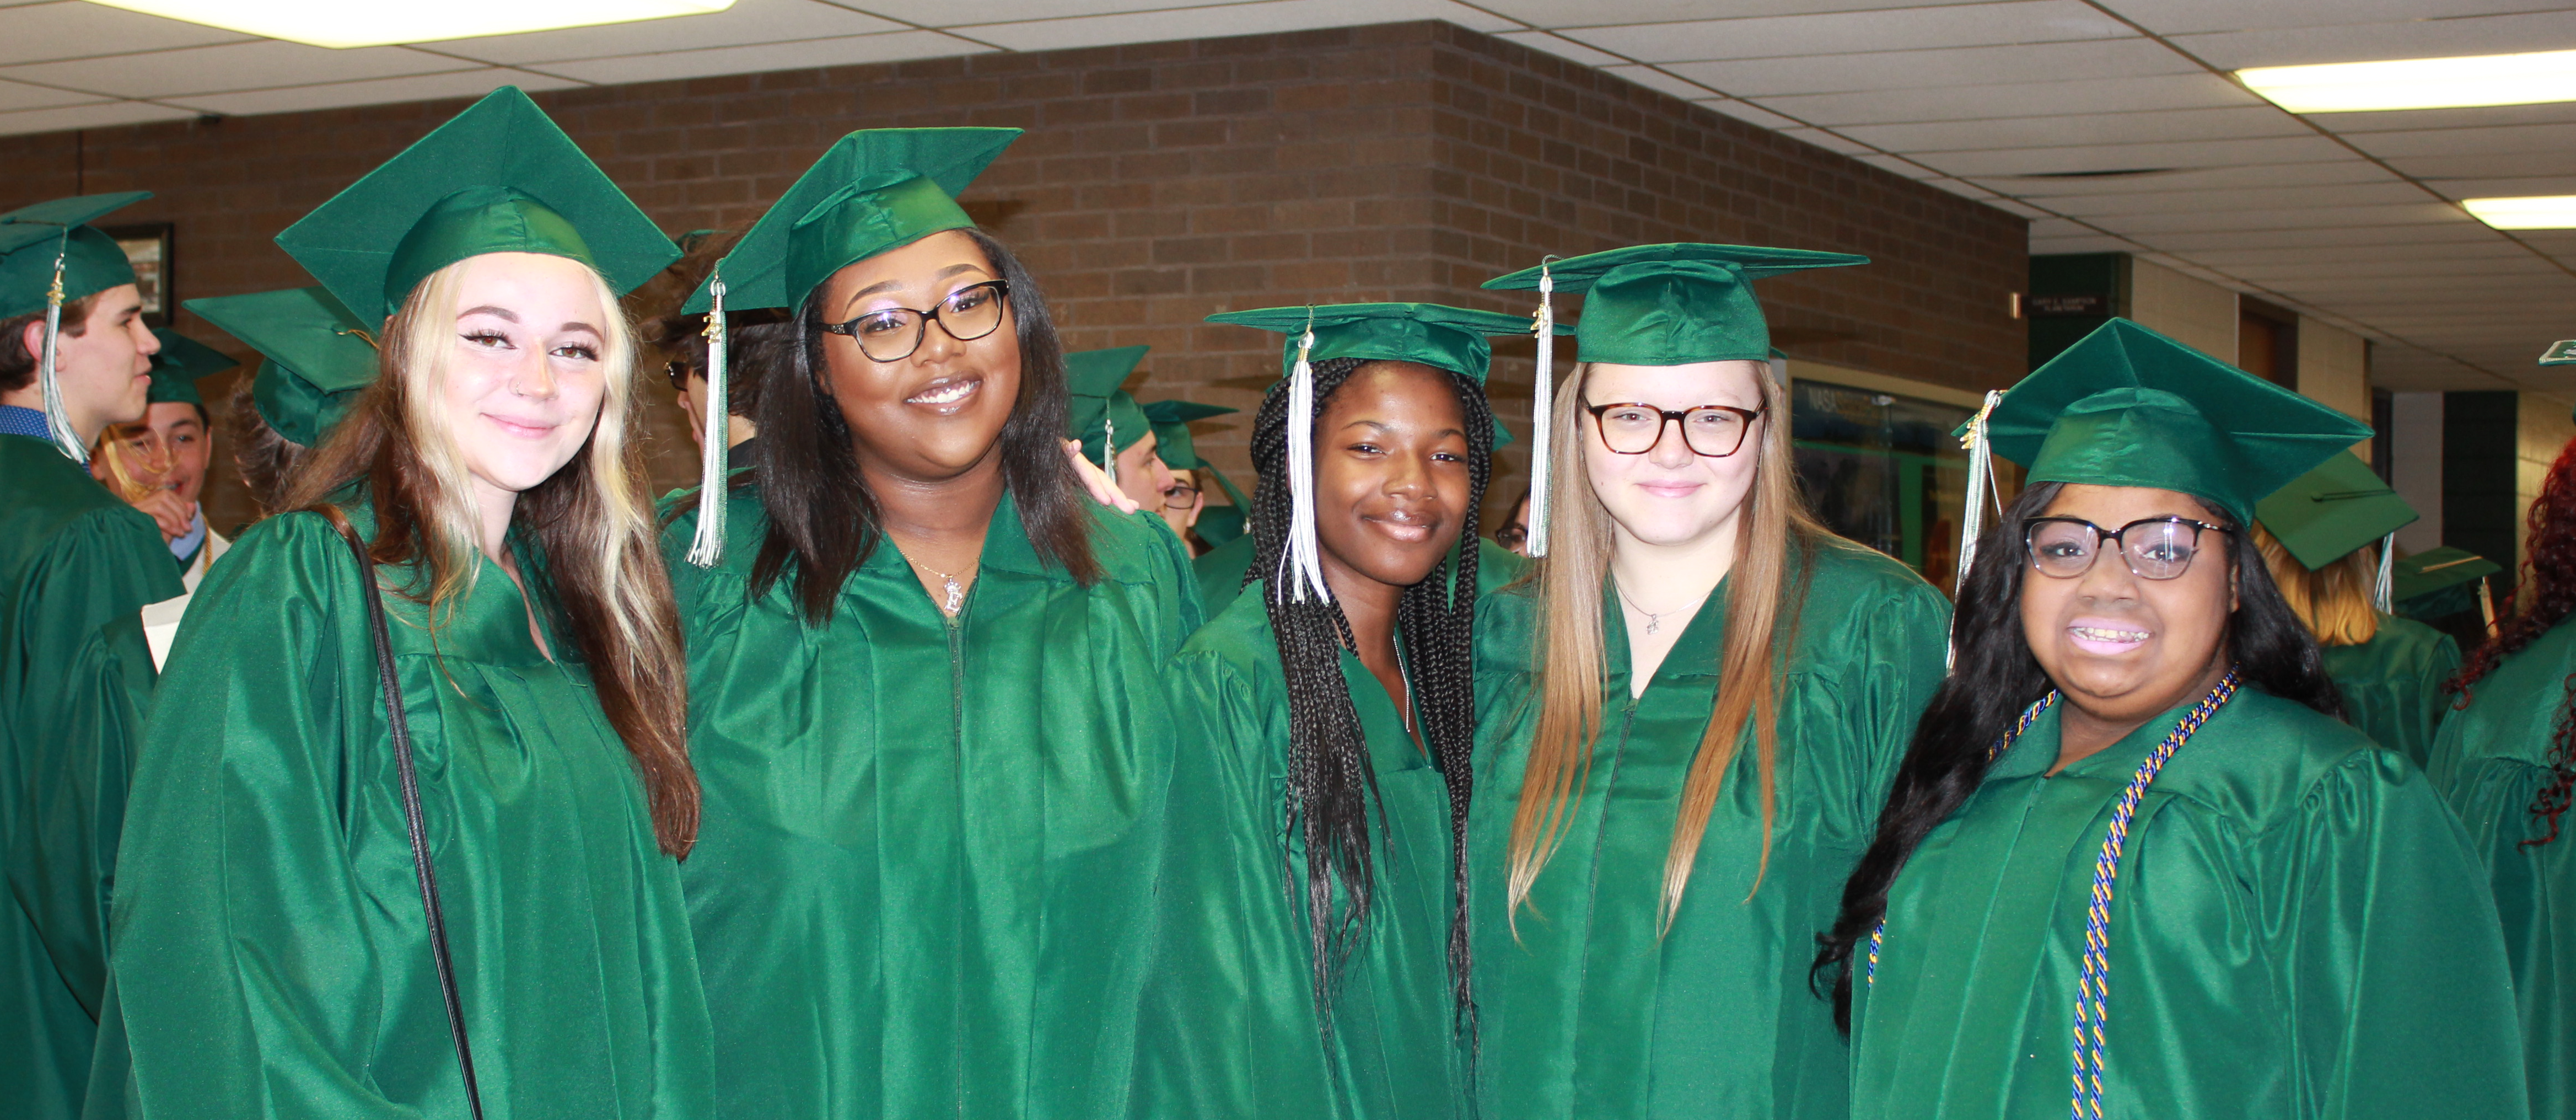 wauwatosa west students at graduation ceremony